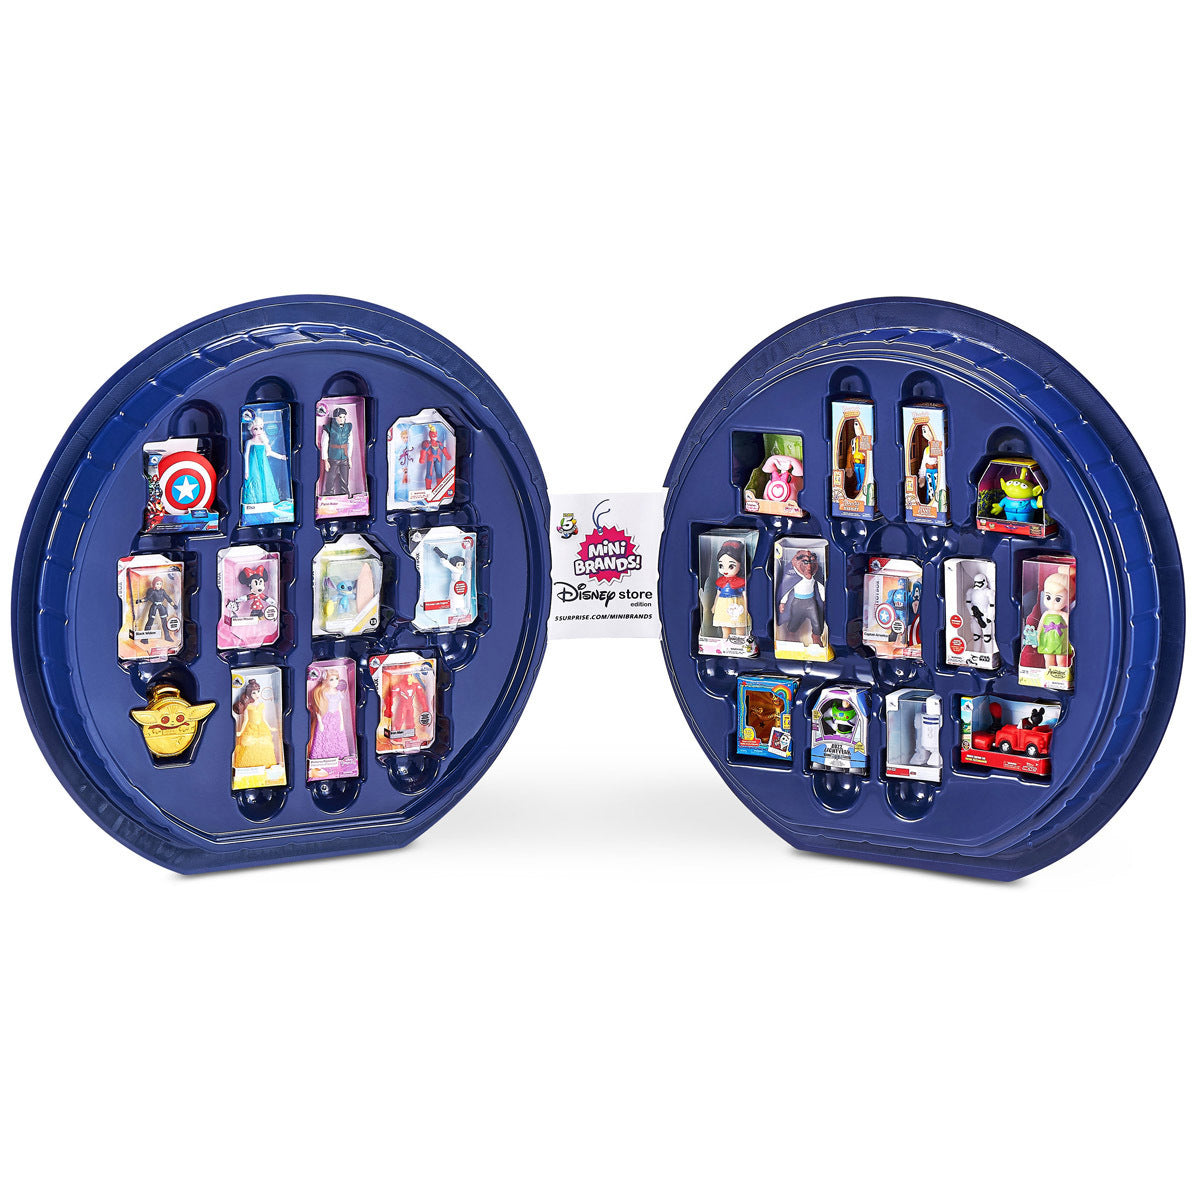 5 Surprise Mini Disney Brands Series 1 Collector's Case with 5 Minis b –  The Entertainer Pakistan